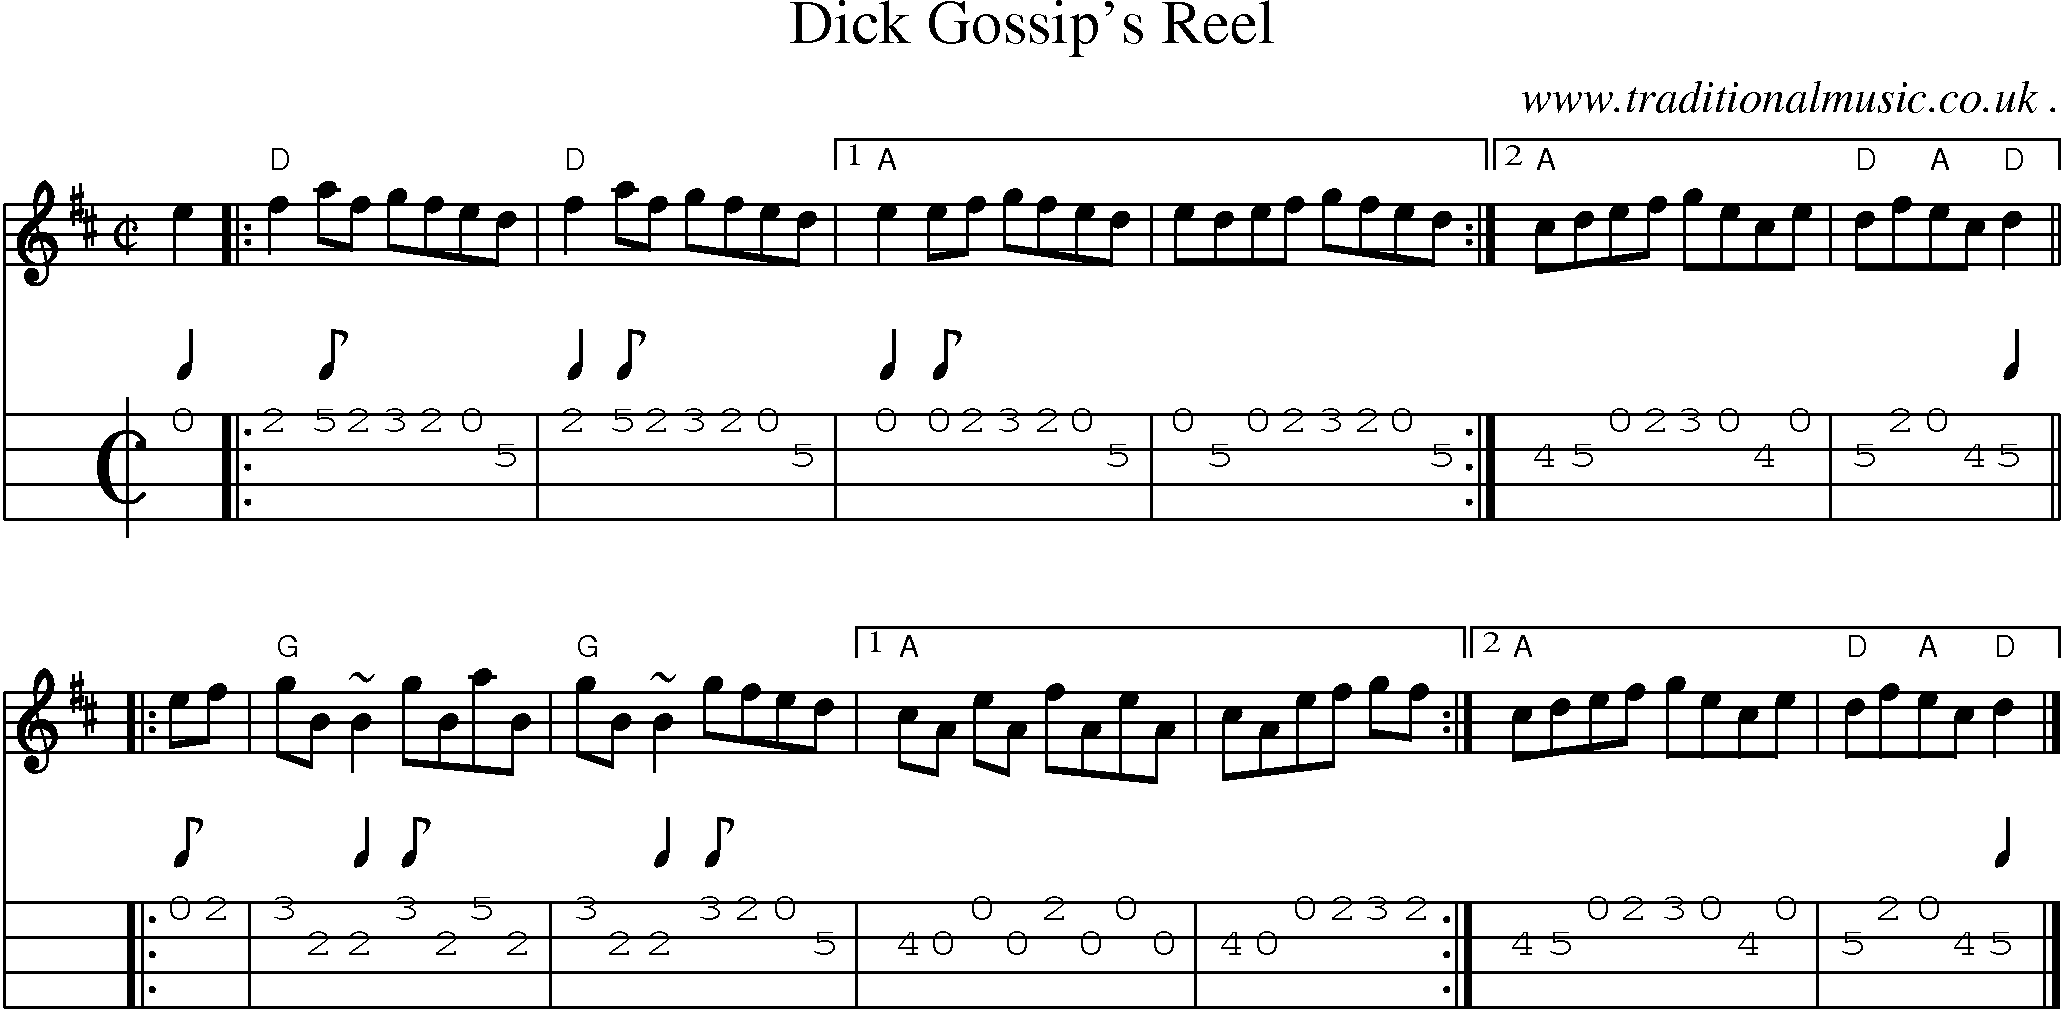 Sheet-music  score, Chords and Mandolin Tabs for Dick Gossips Reel